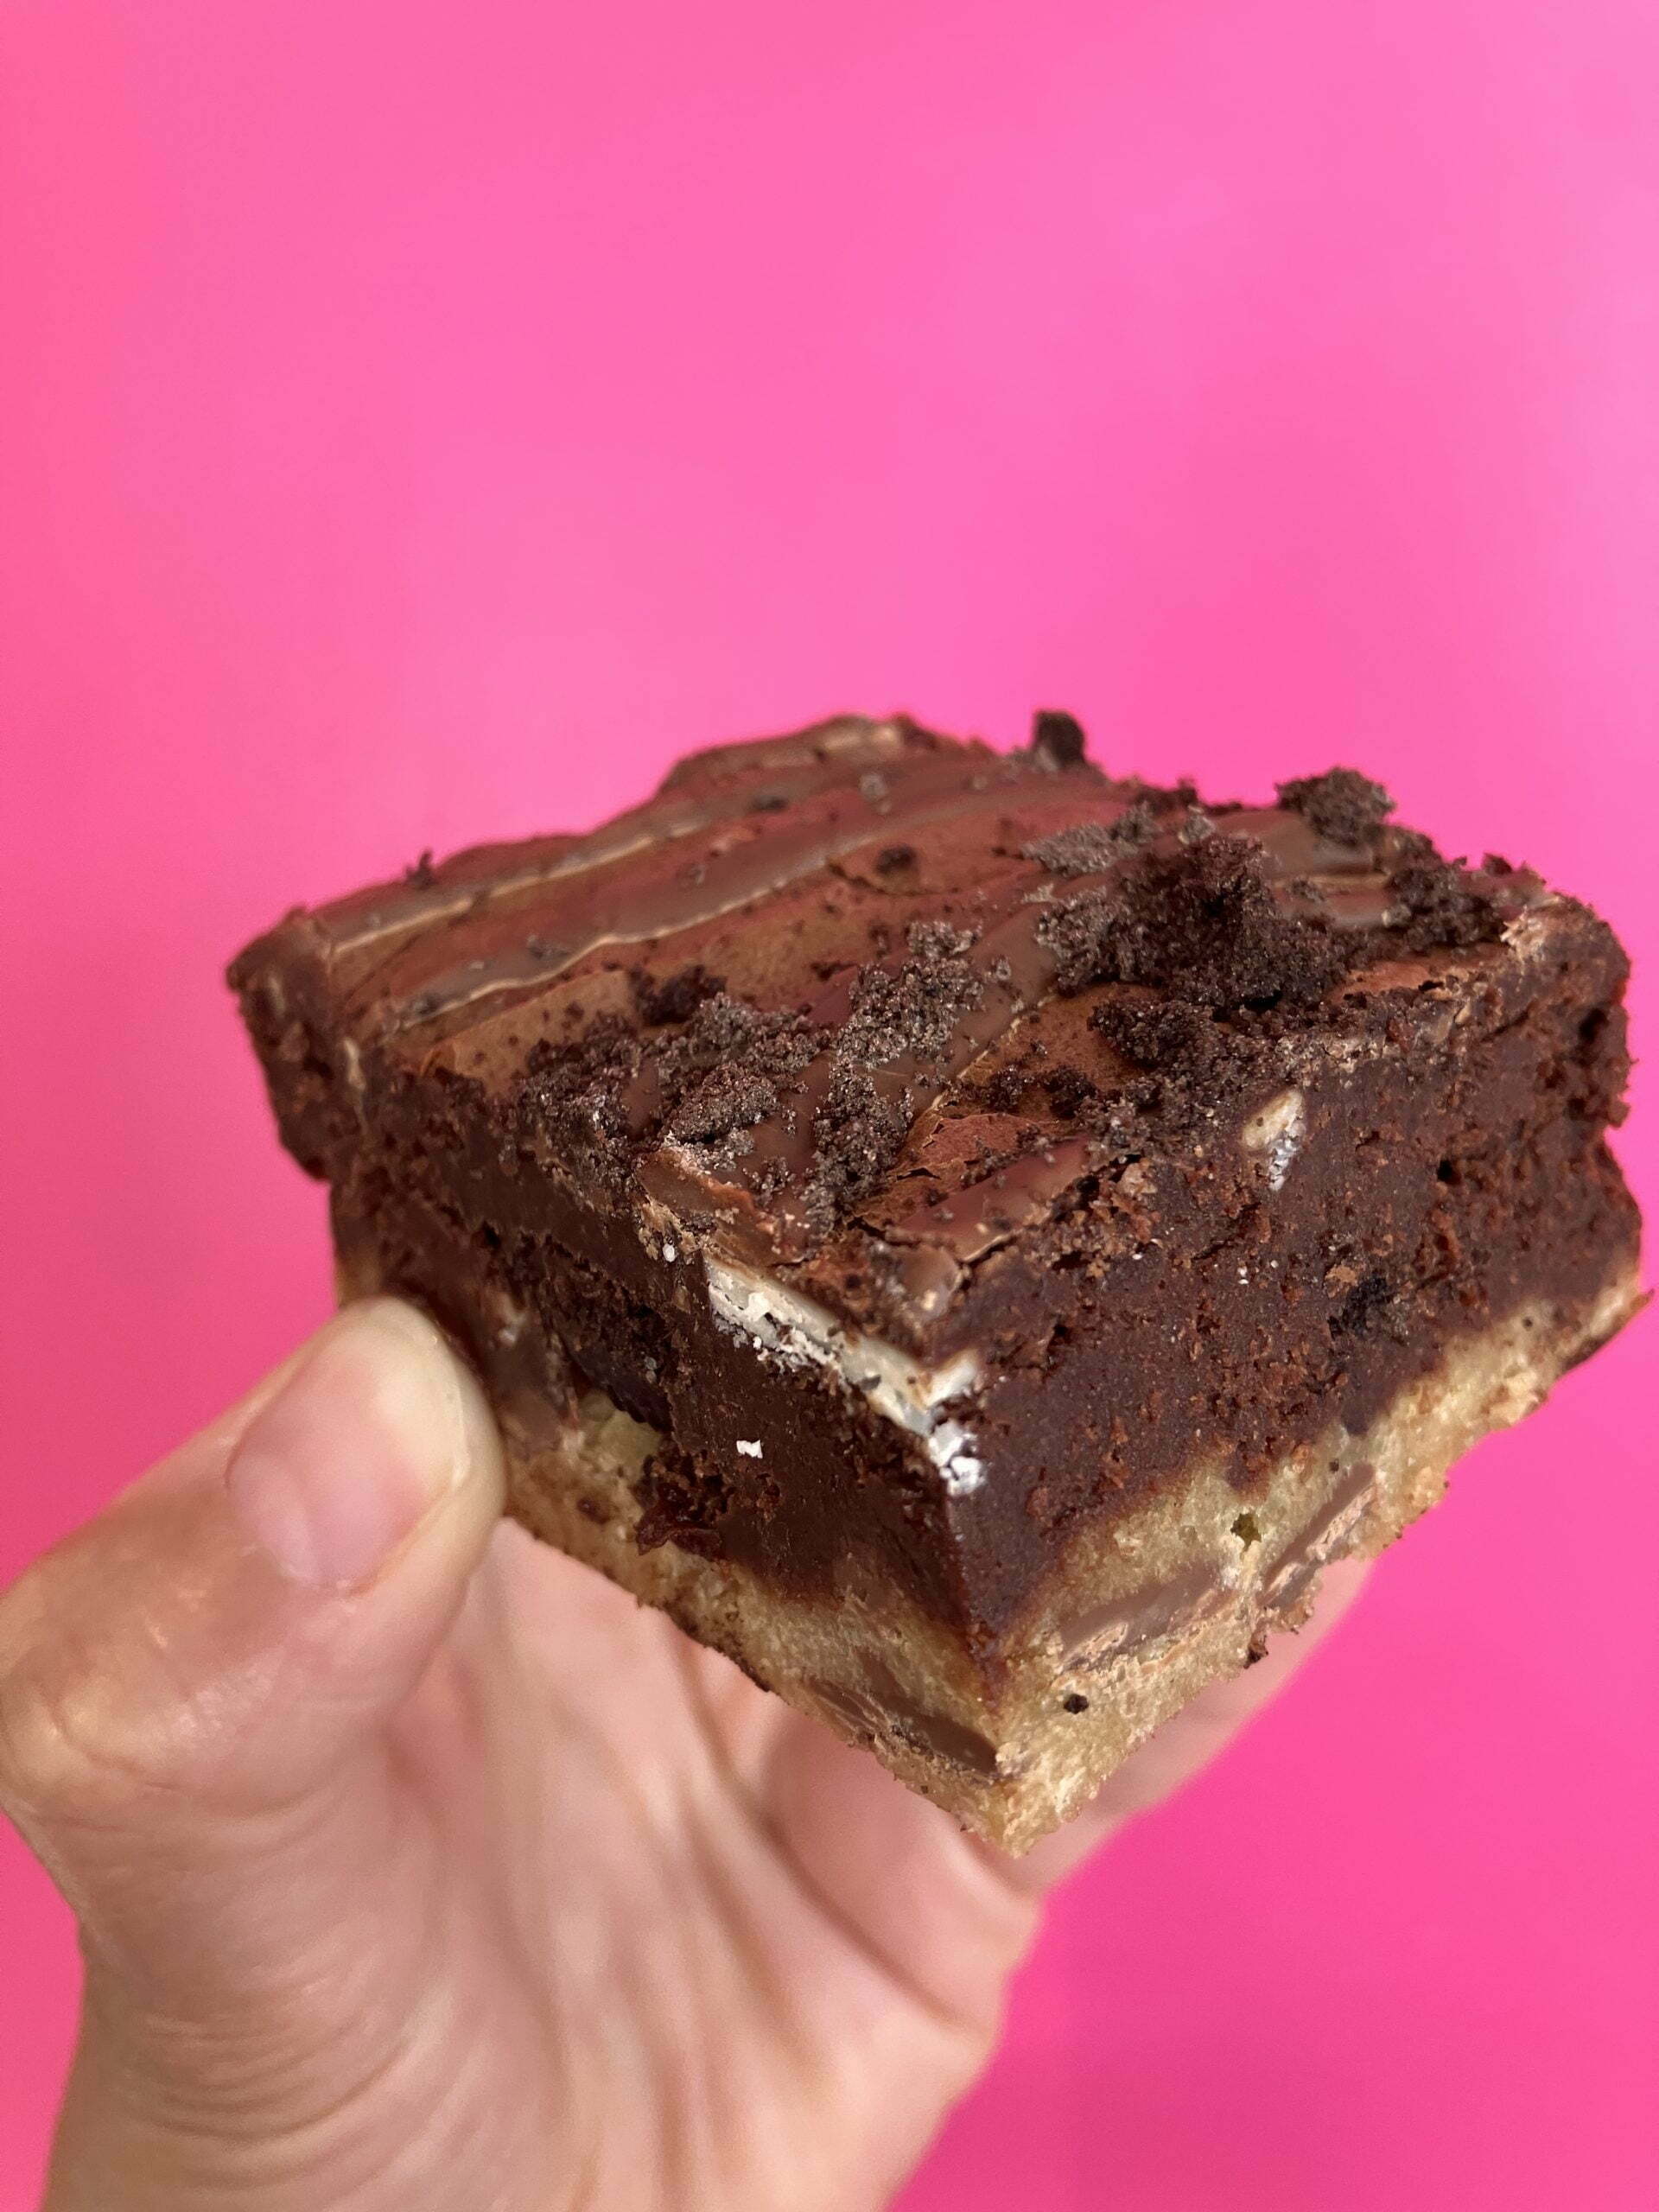 Someone is holding a brownie for wholesale against a pink background